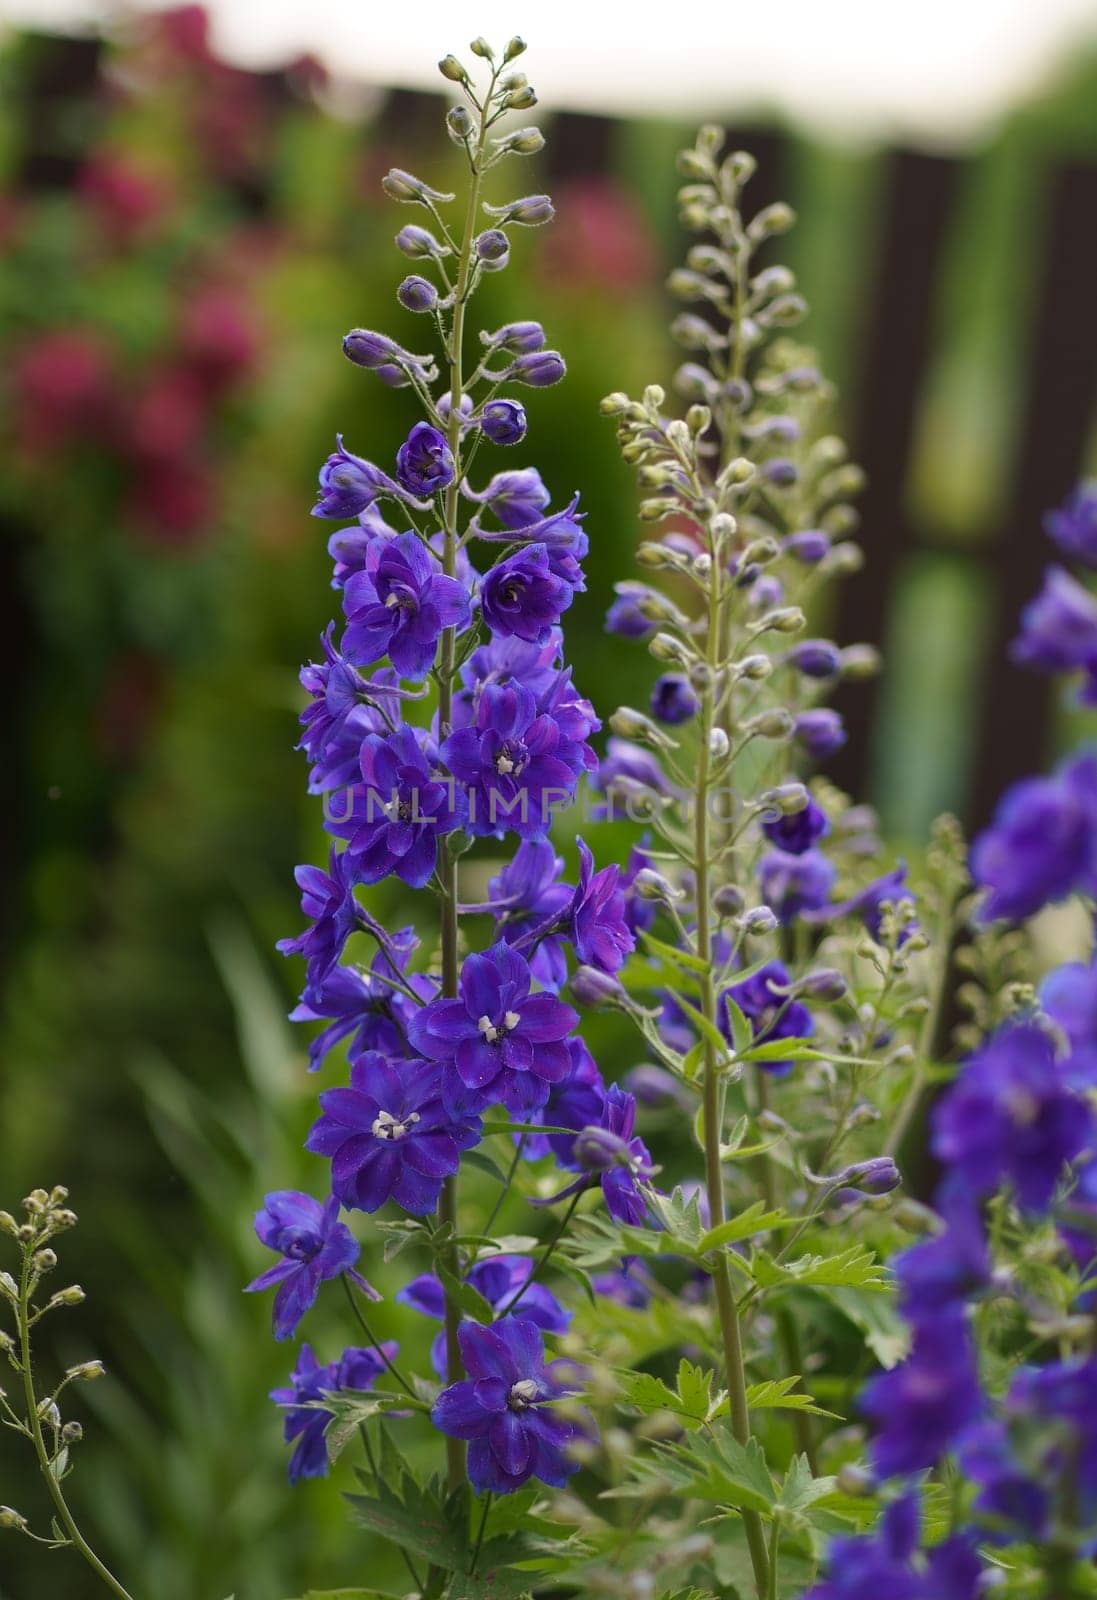 Summer in the garden. The delphinium blooms beautifully. Blue flower is the delphinium in the garden on a natural background by aprilphoto